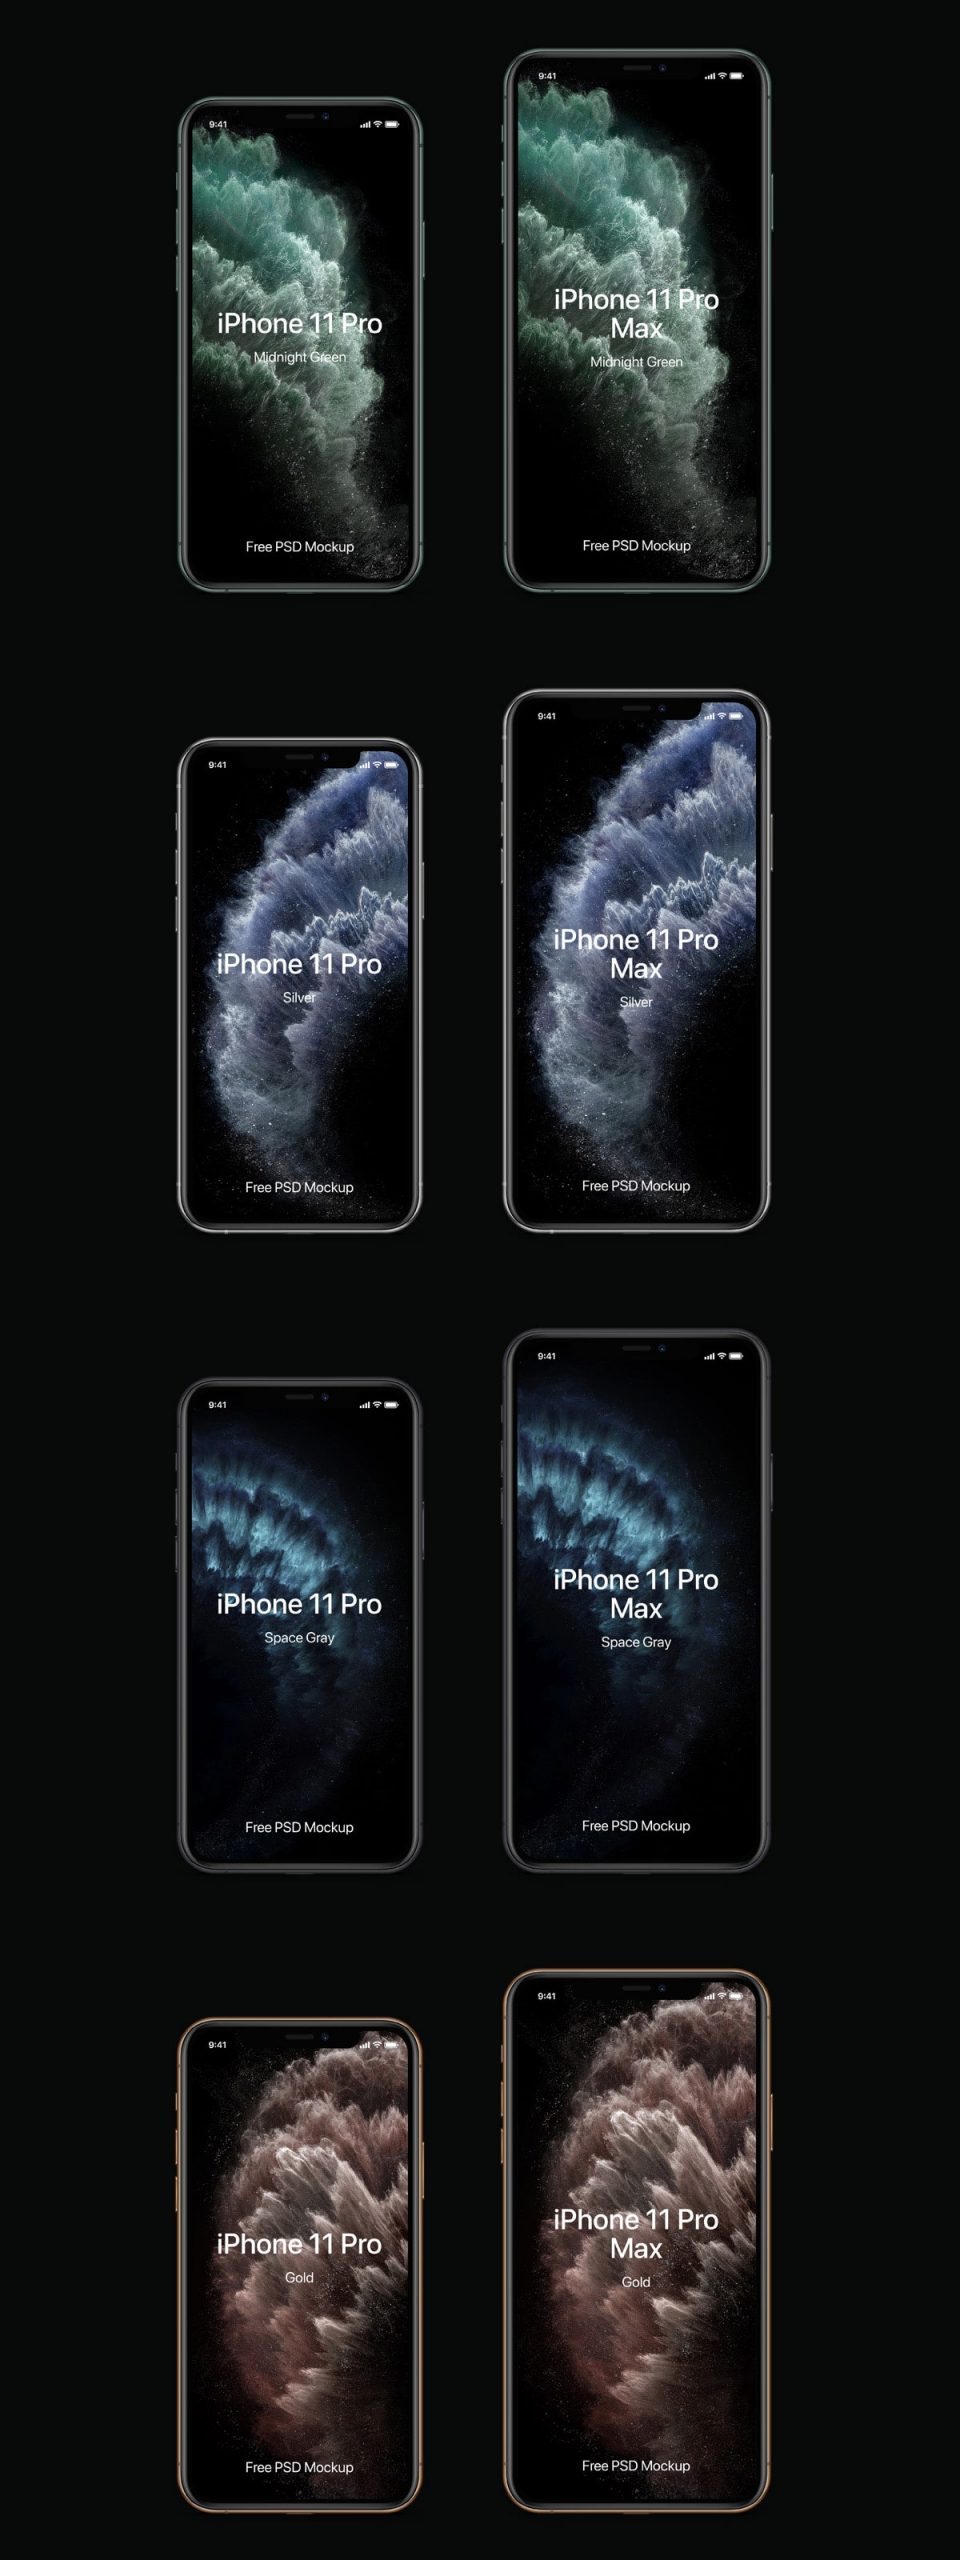 Download Free iPhone 11 Pro & iPhone 11 Pro Max Mockup Set - Find ...